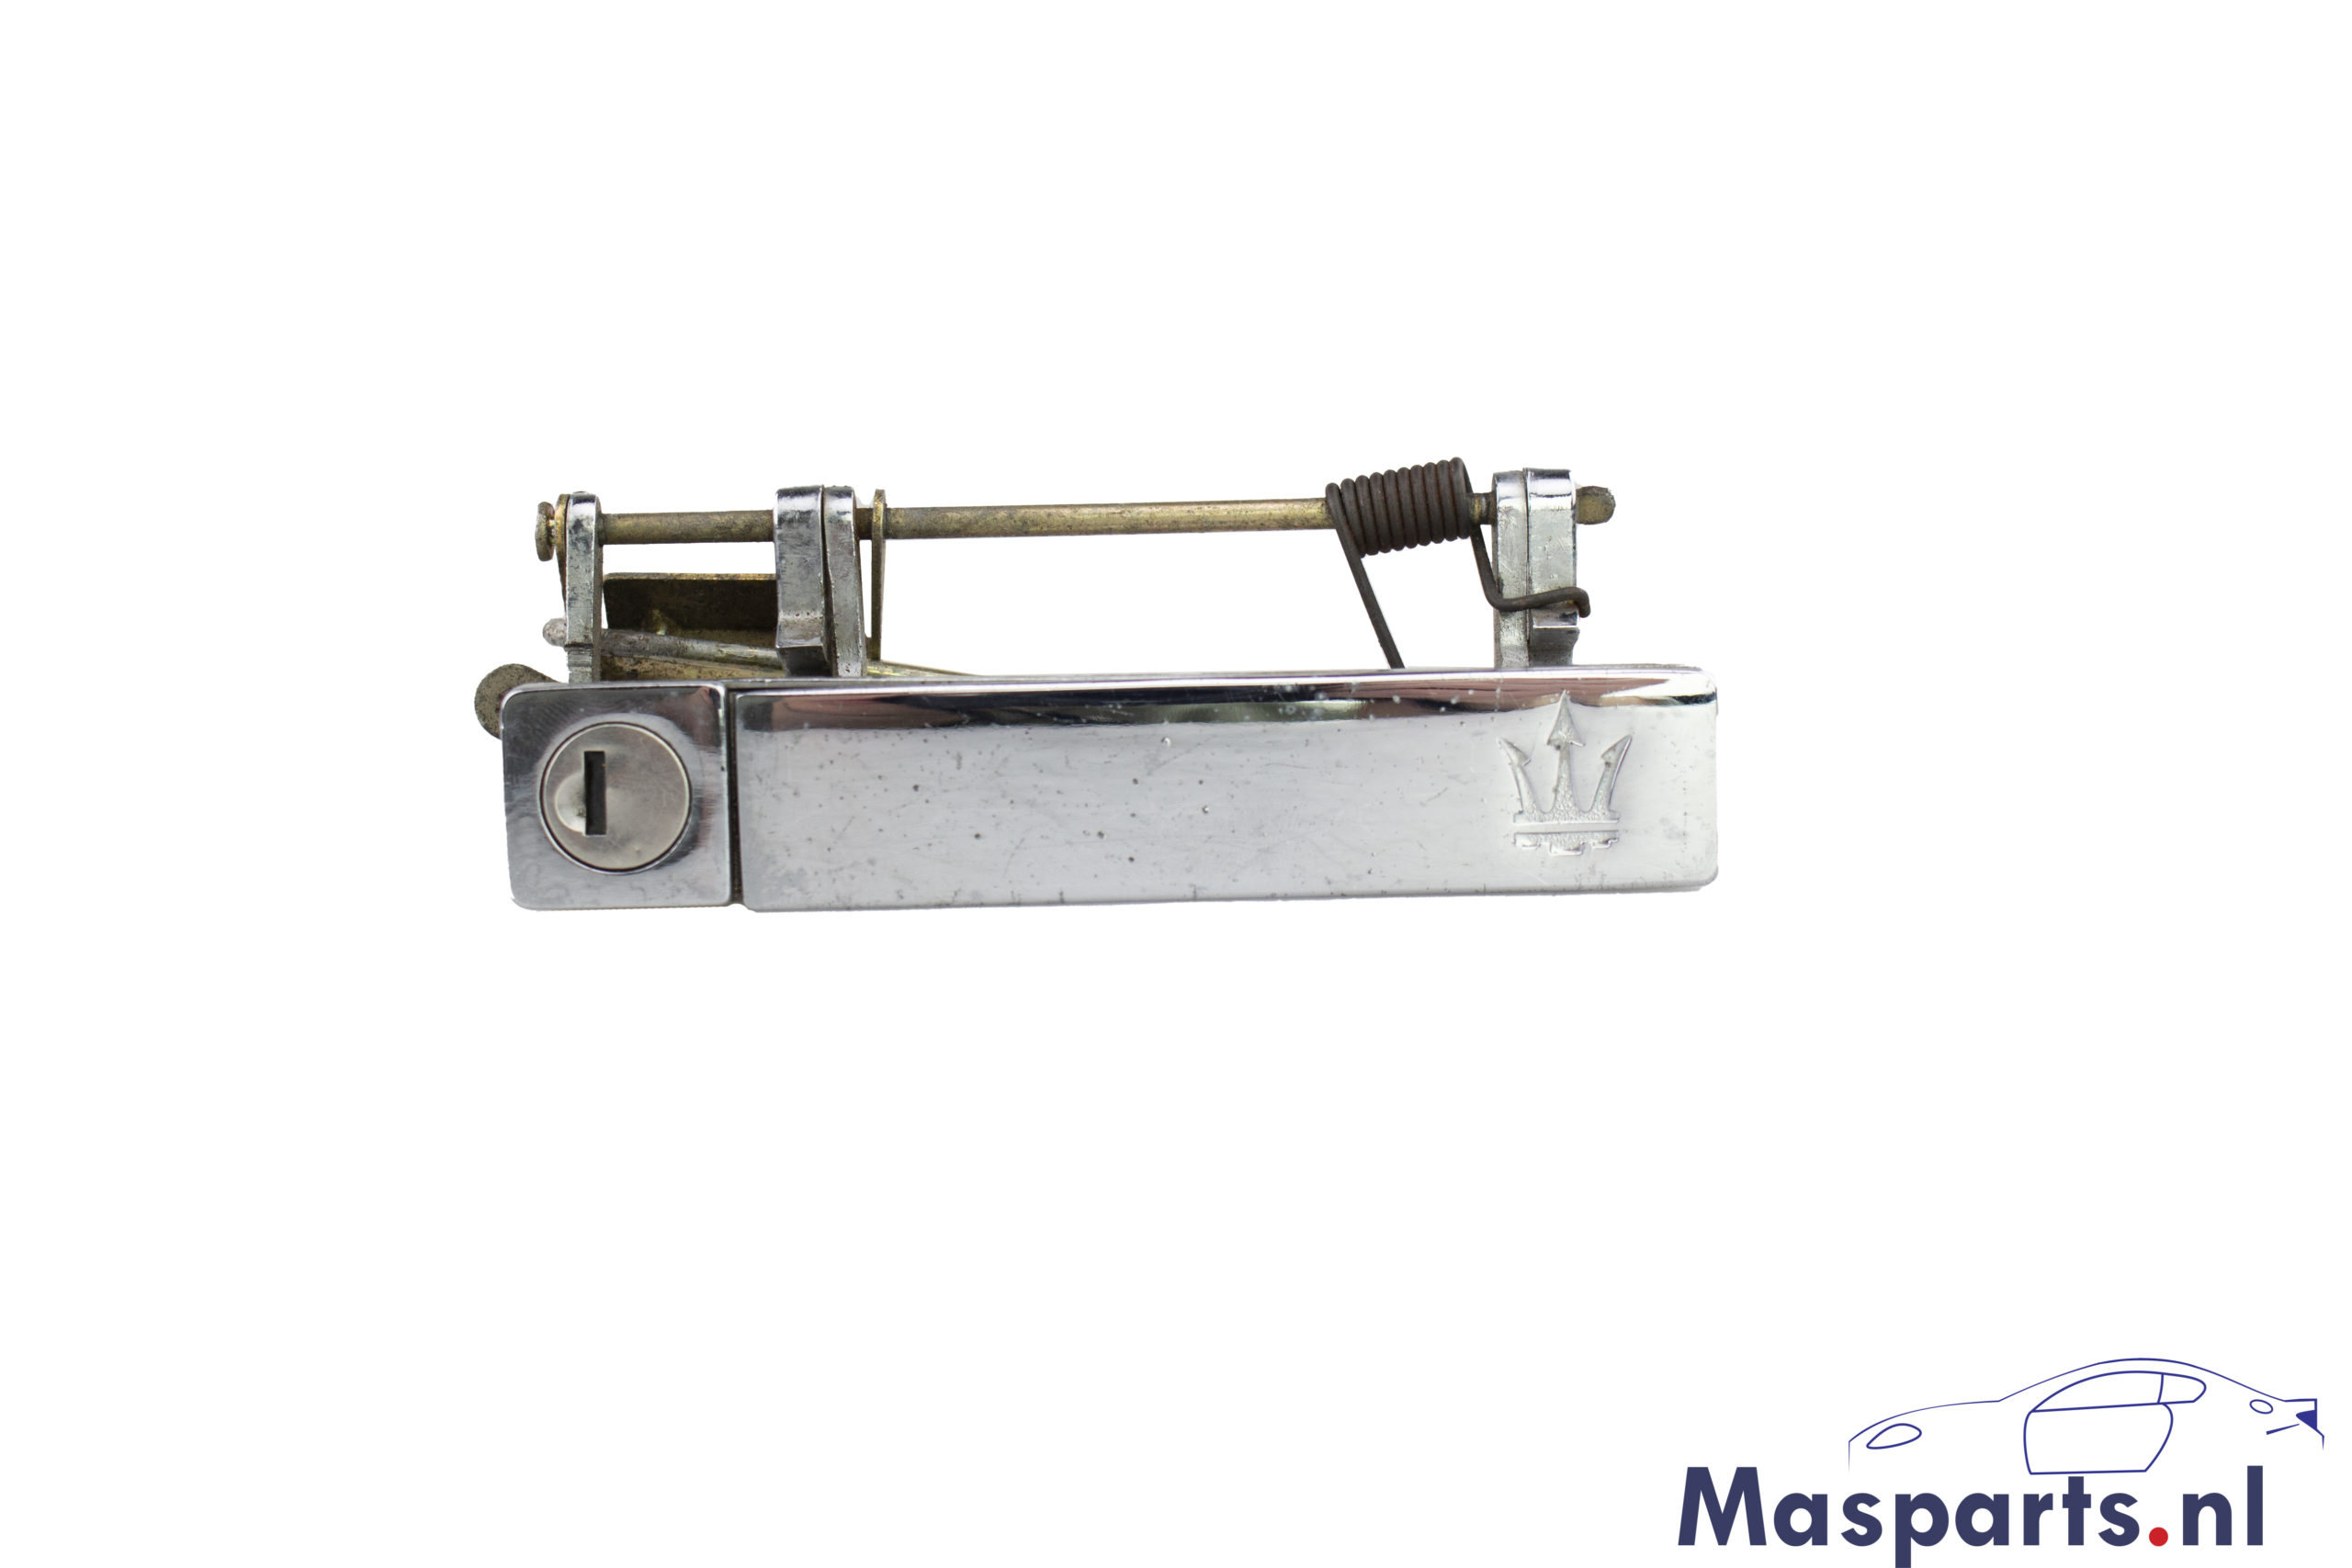 A used Maserati Biturbo door handle with part number 0229020100